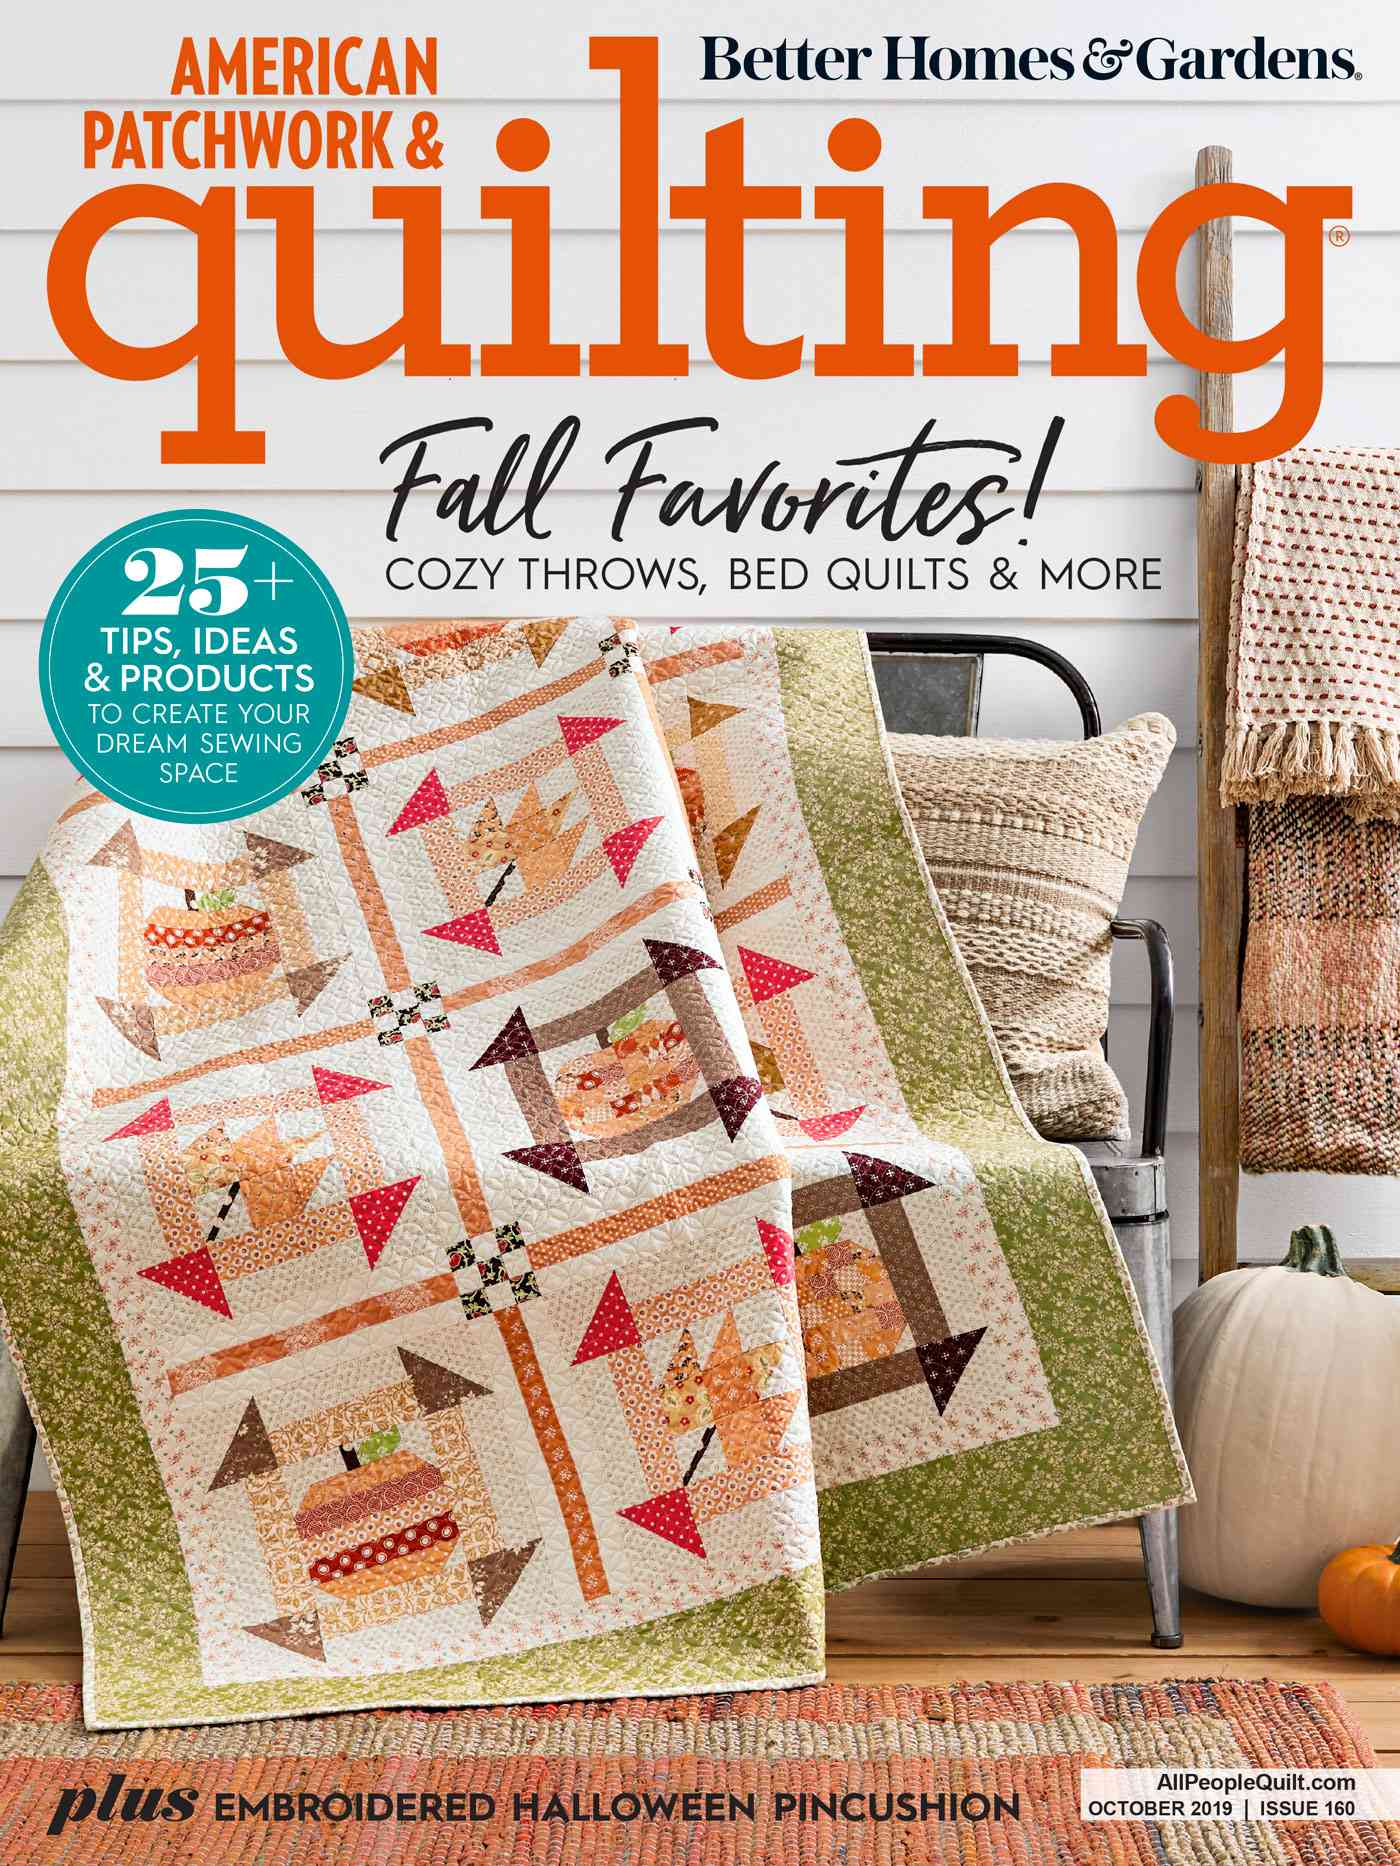 American Patchwork & Quilting October 2019